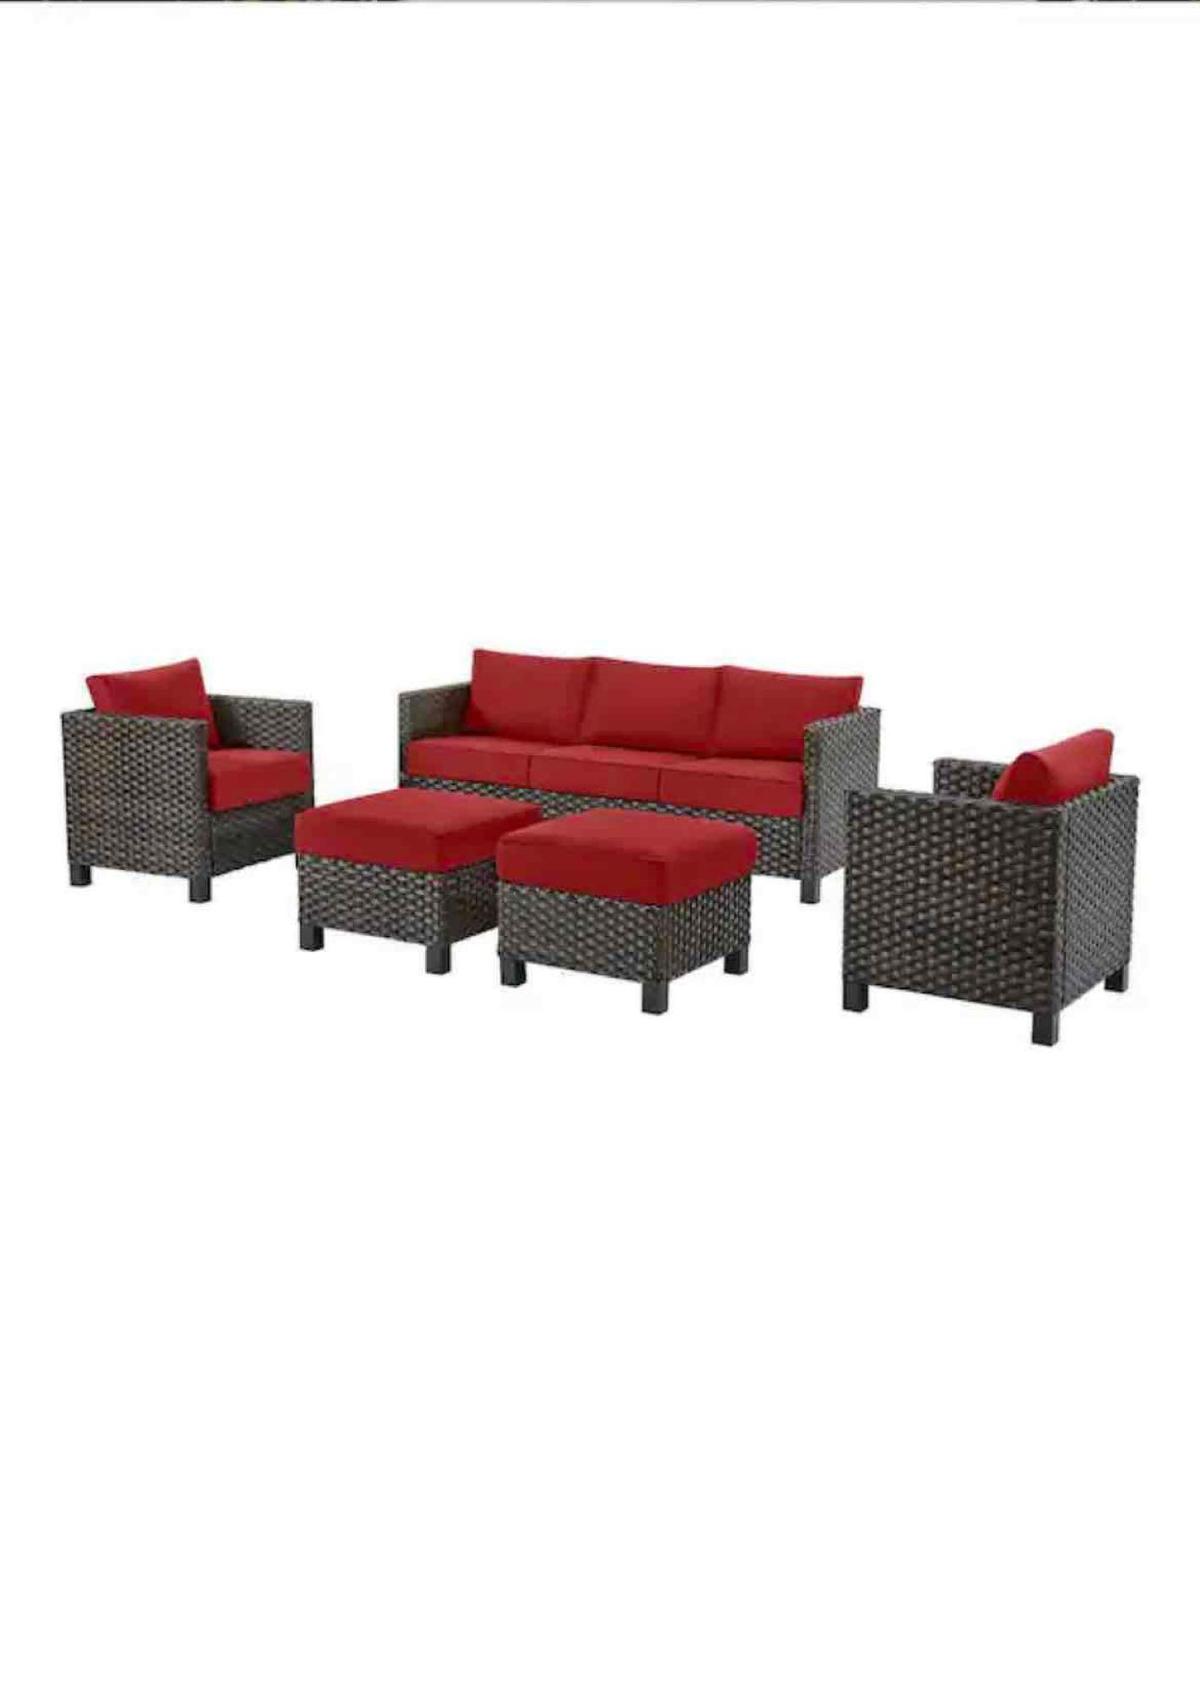 Sharon Hill 4-Piece Wicker Outdoor Lounge Chairs